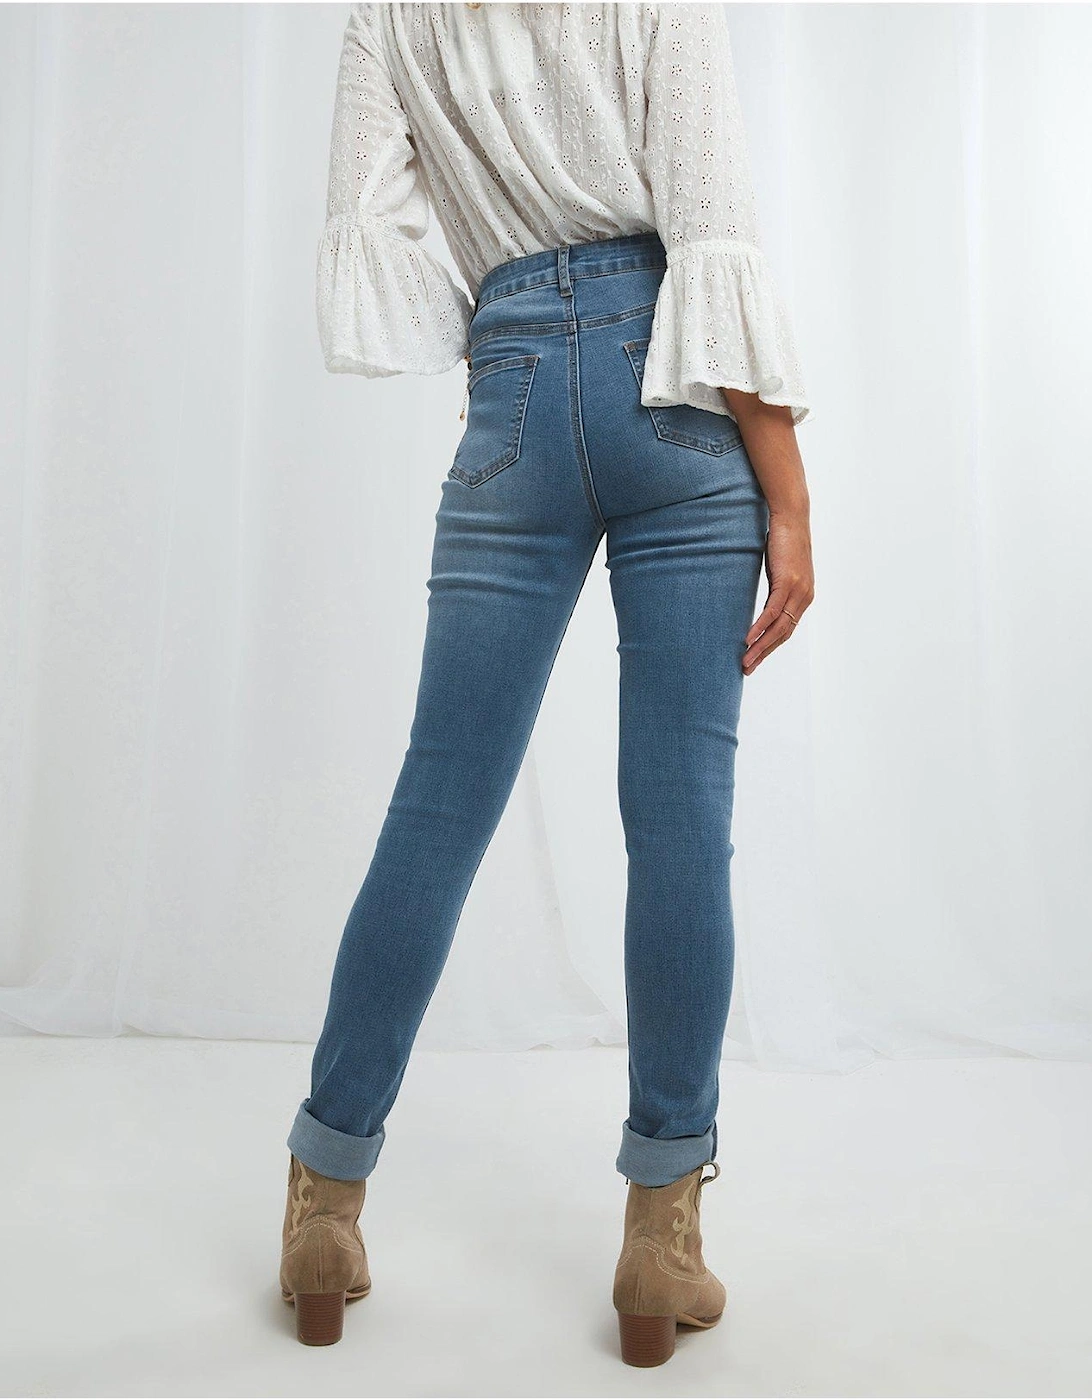 Must Have Skinny Fit Jeans - Light Blue